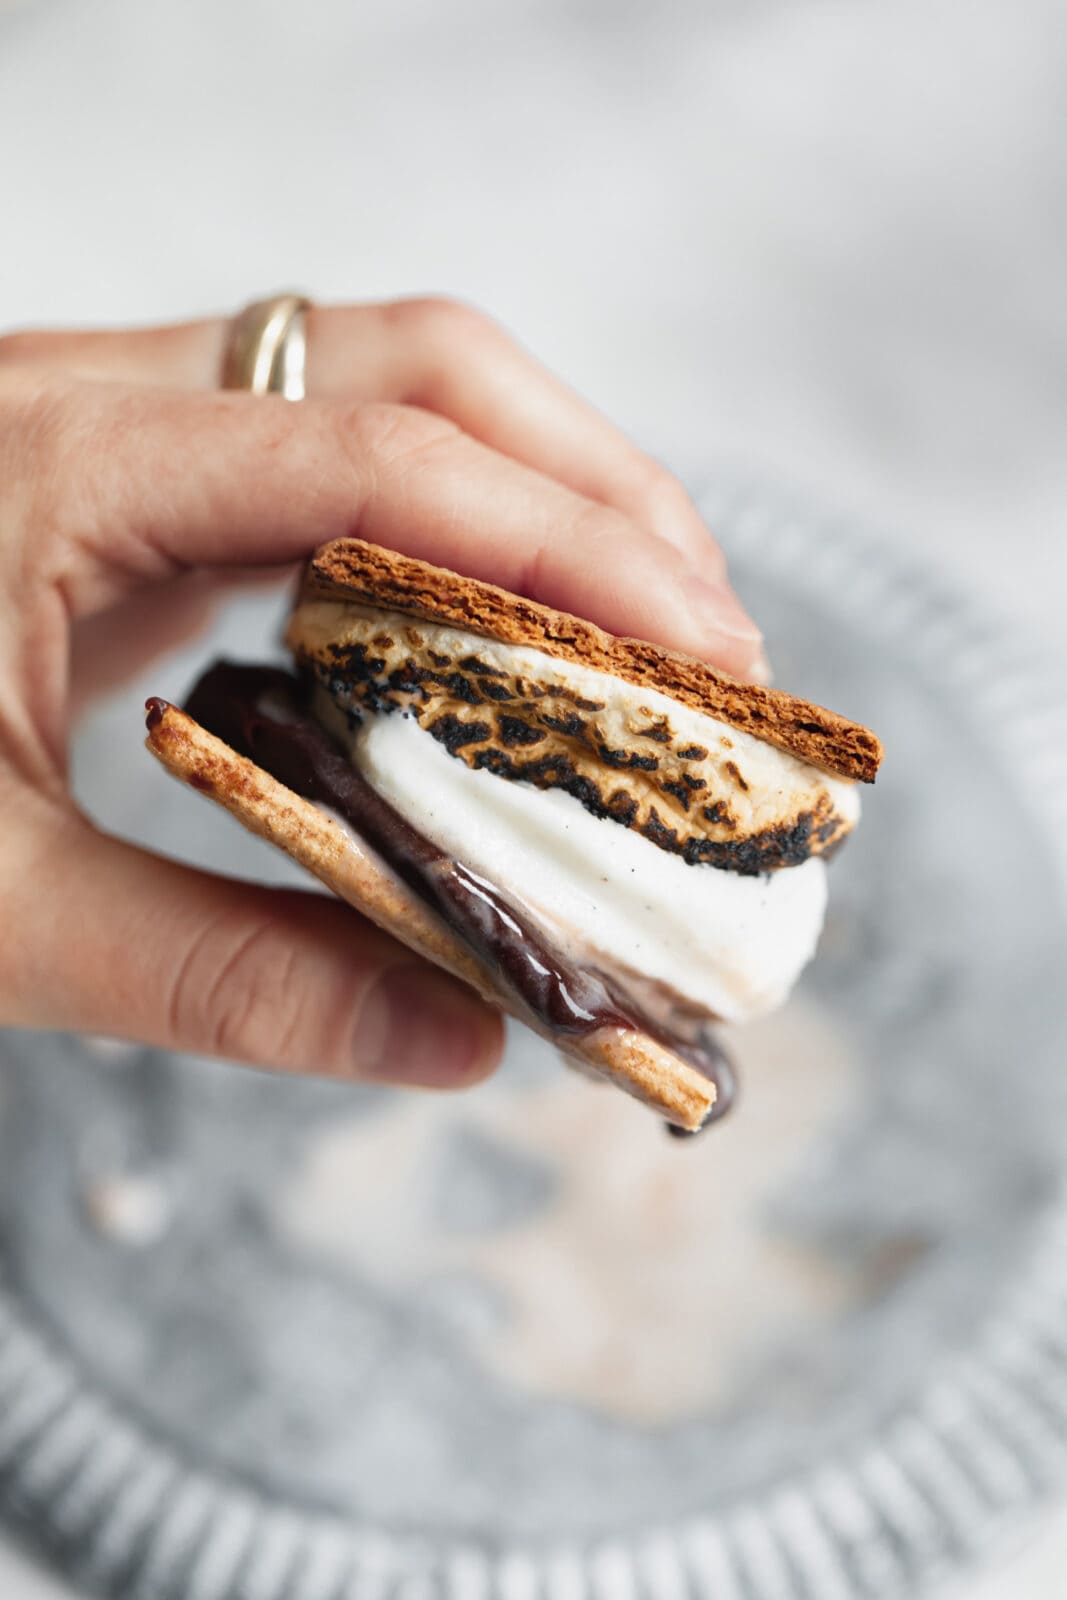 s'mores ice cream sandwich in a hand